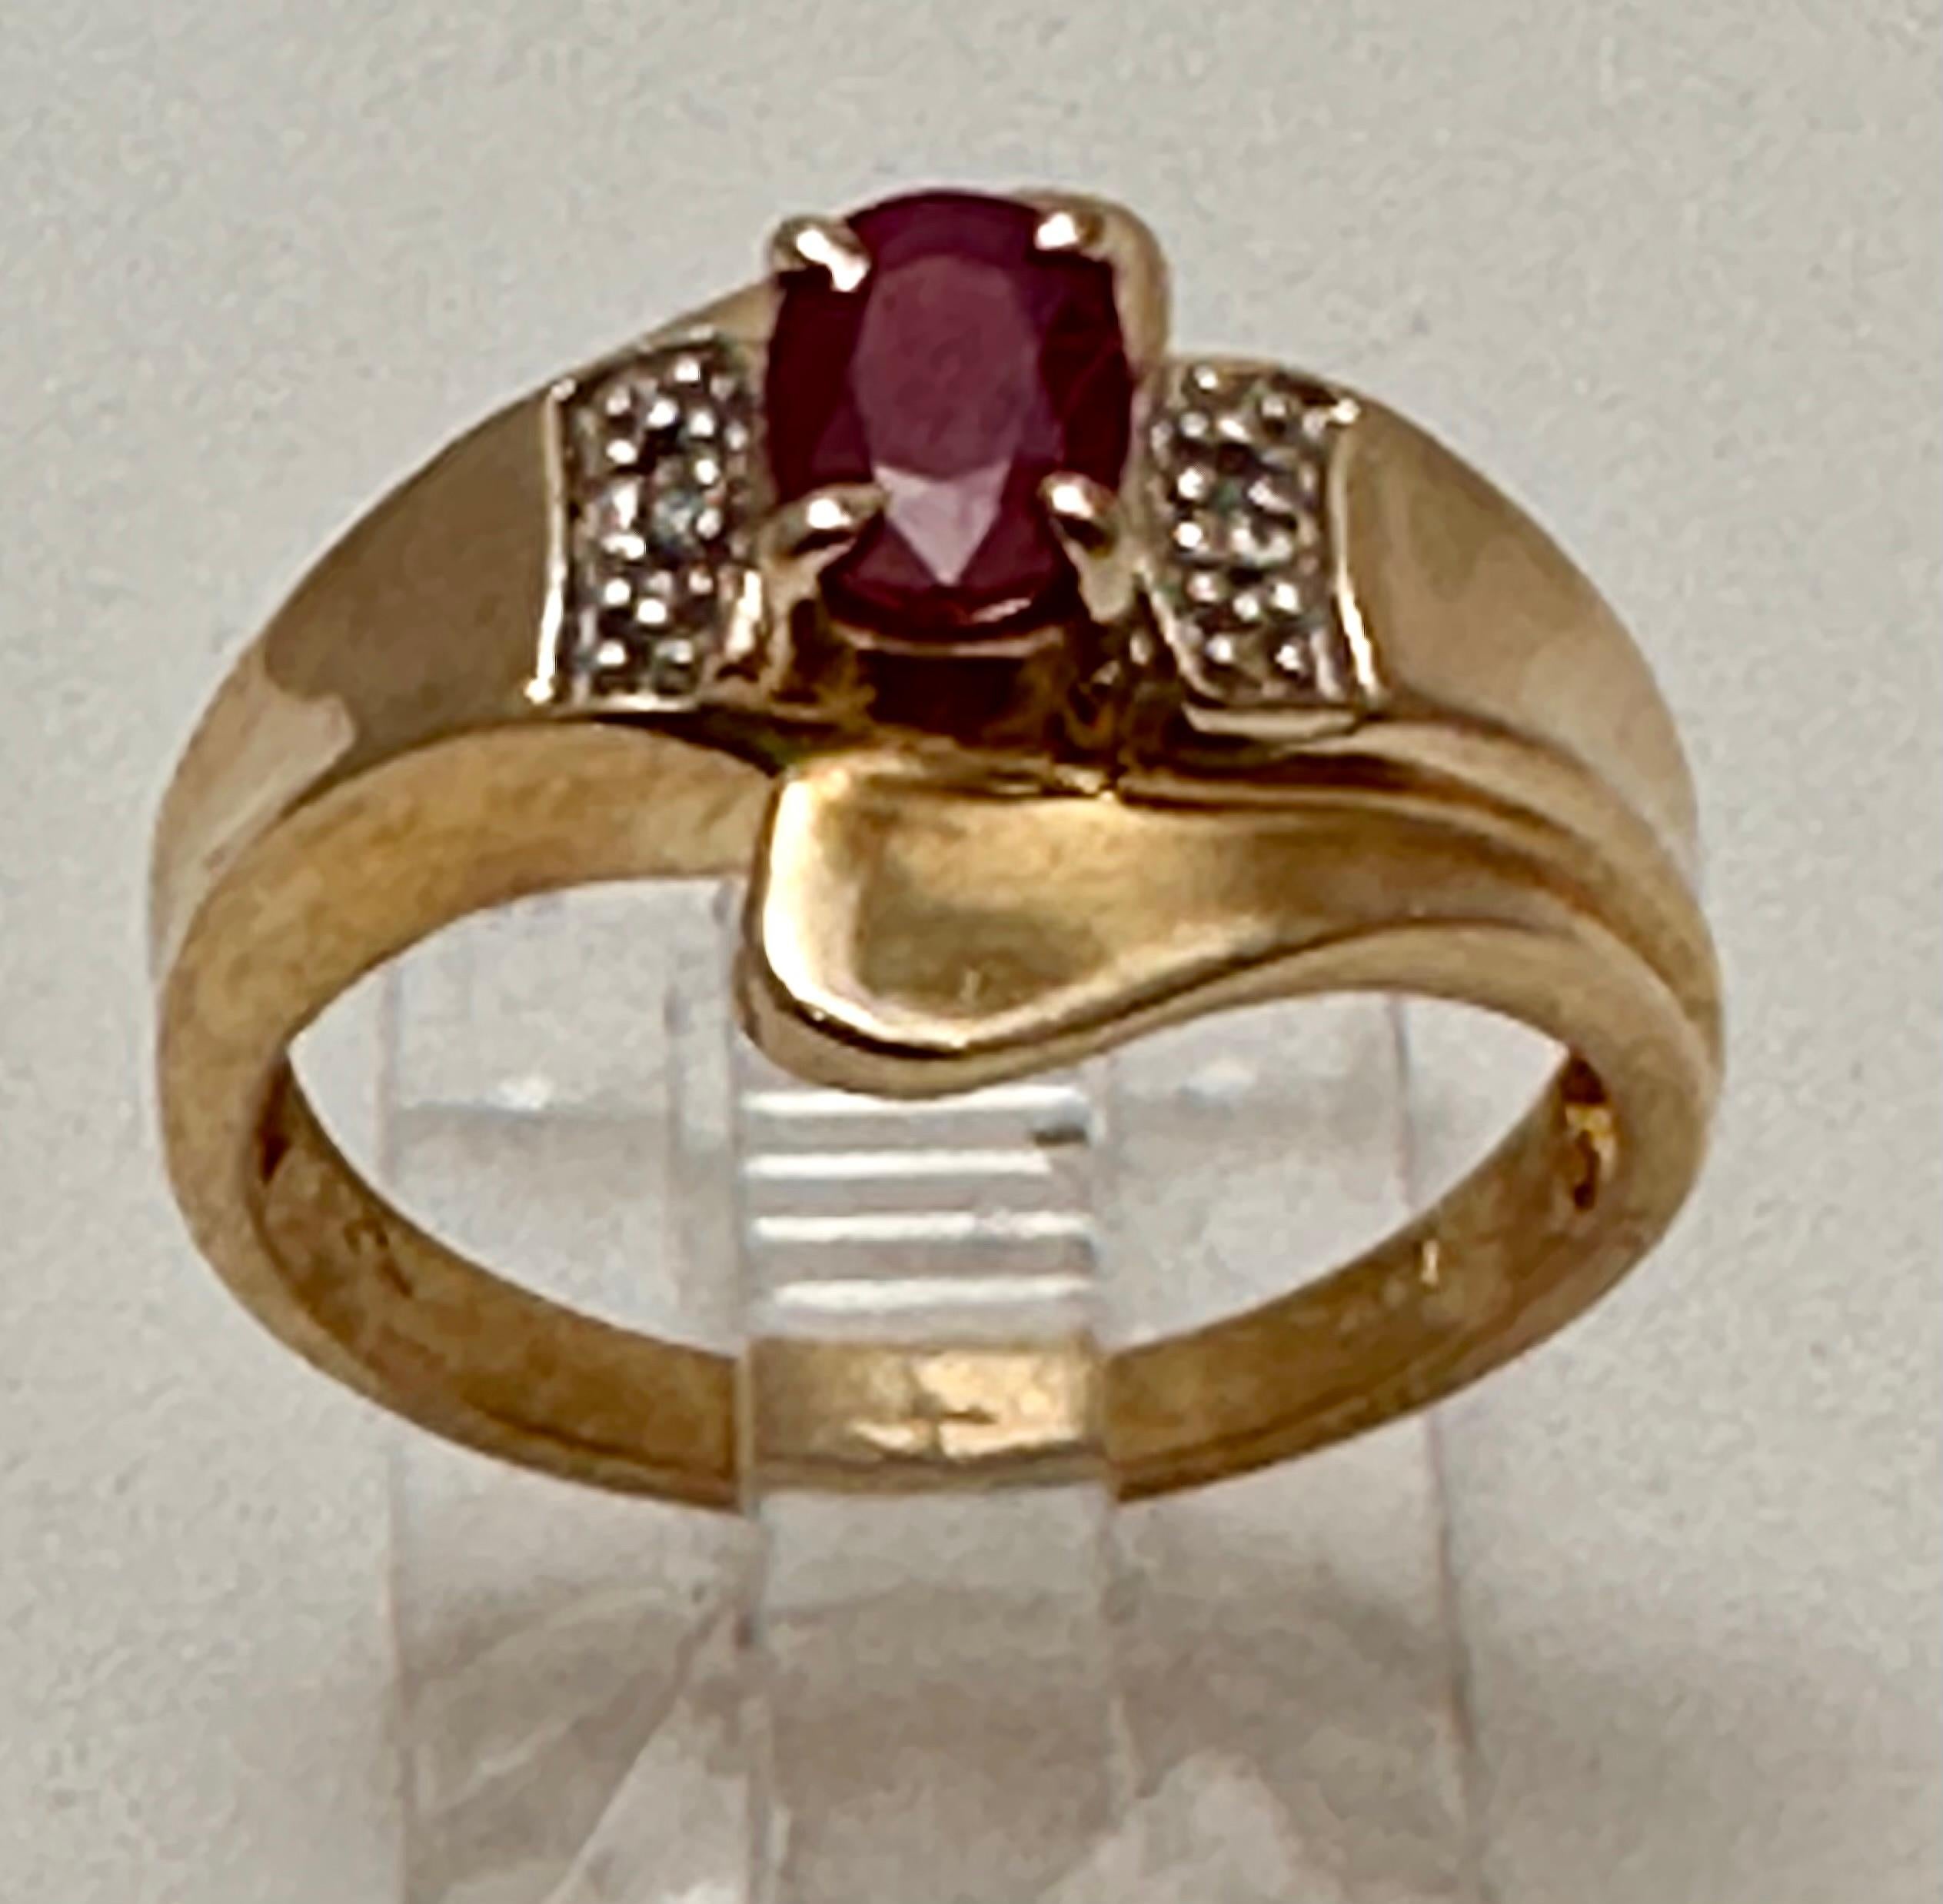 14k Yellow Gold 4mm x 6mm Oval Ruby 2 Side Diamond Ring Size 6

The ruby is known as a protective stone that can bring happiness and passion into the life of the wearer. Apart from its red color, this is why the ruby makes a perfect gift for a loved